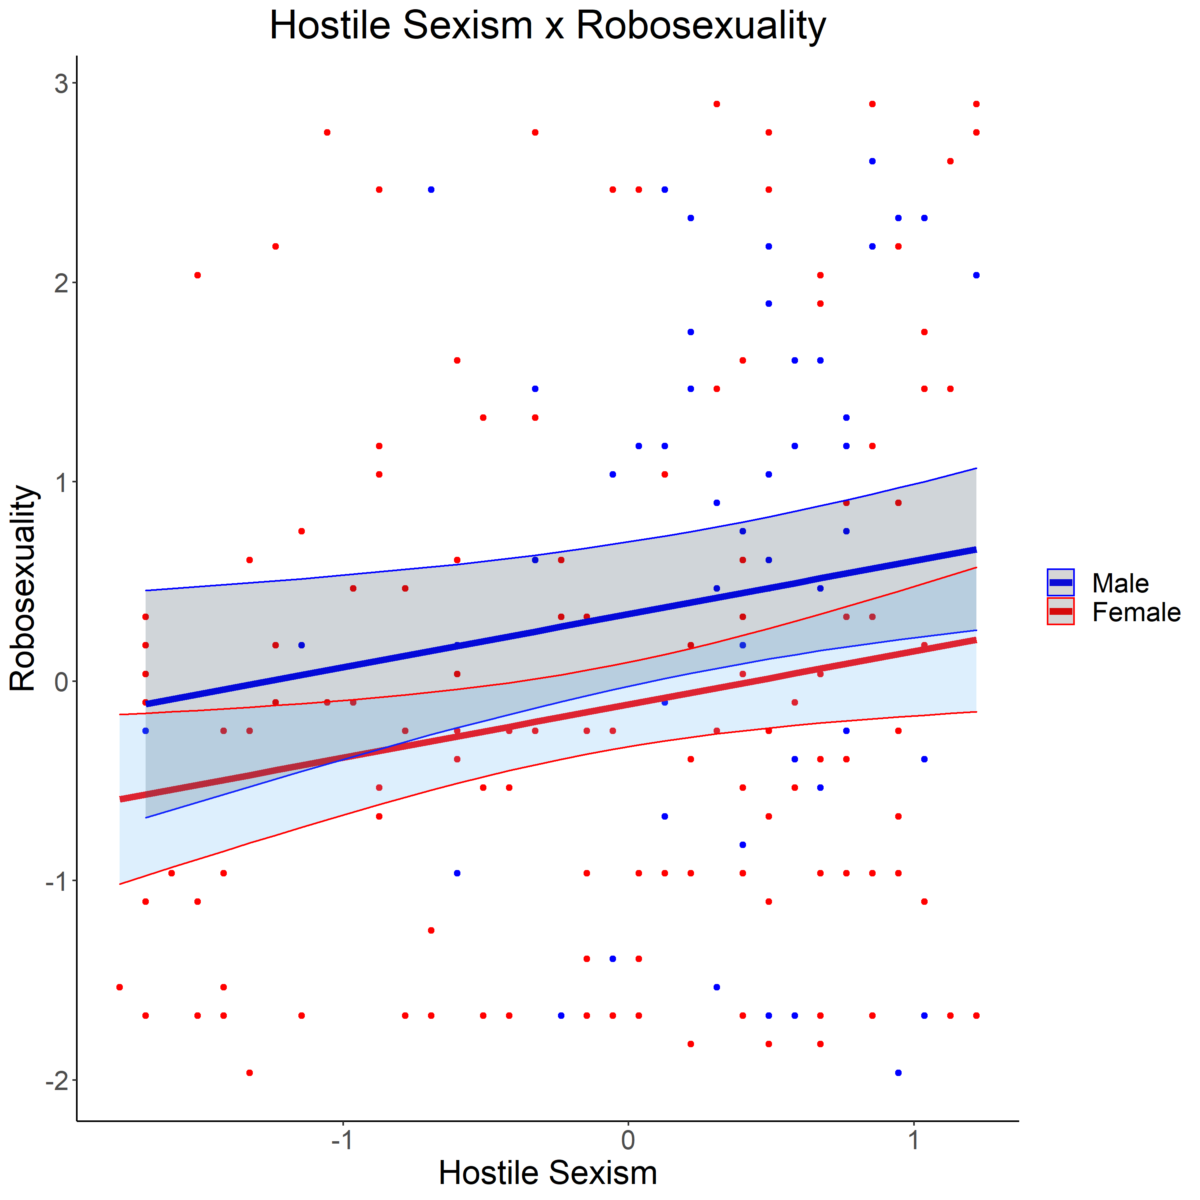 A graph depicting the relationship between hostile sexism and robosexuality in men and women.